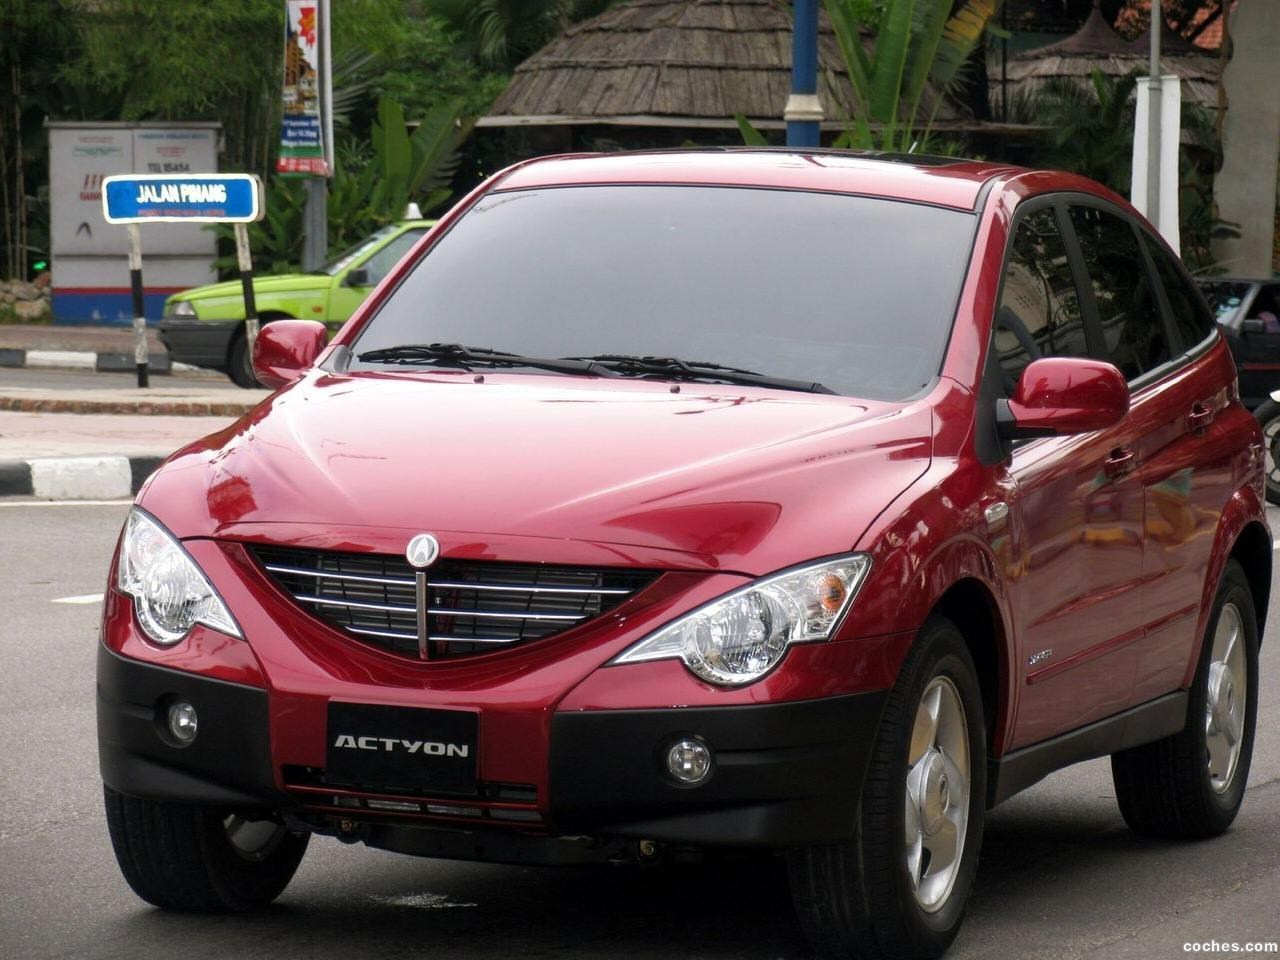 ssangyong_actyon_r6